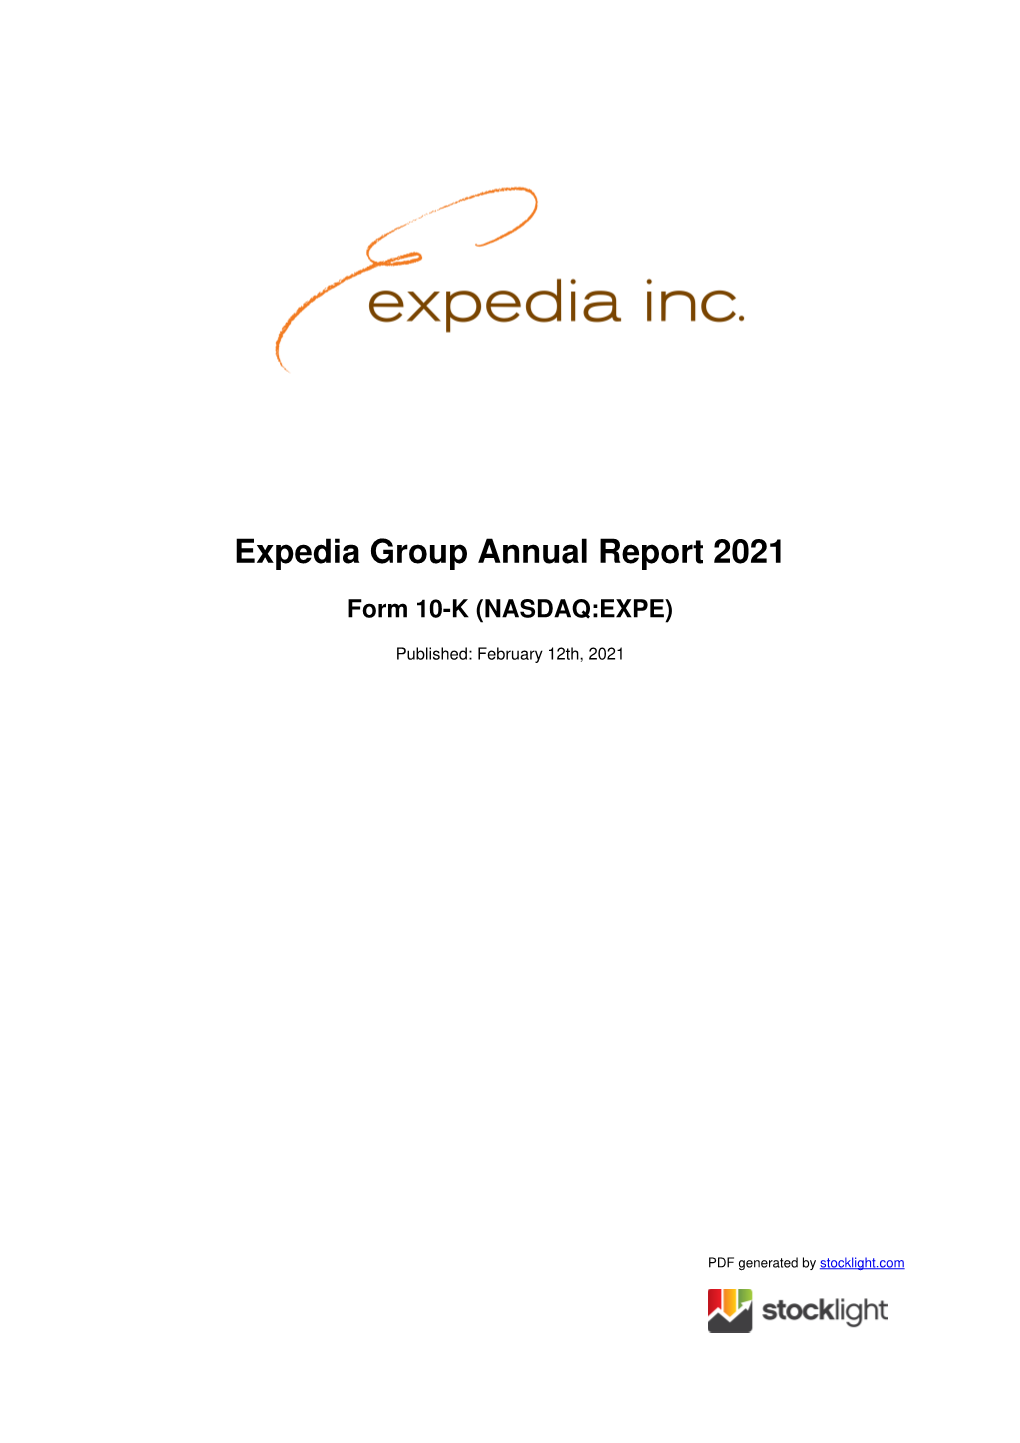 Expedia Group Annual Report 2021